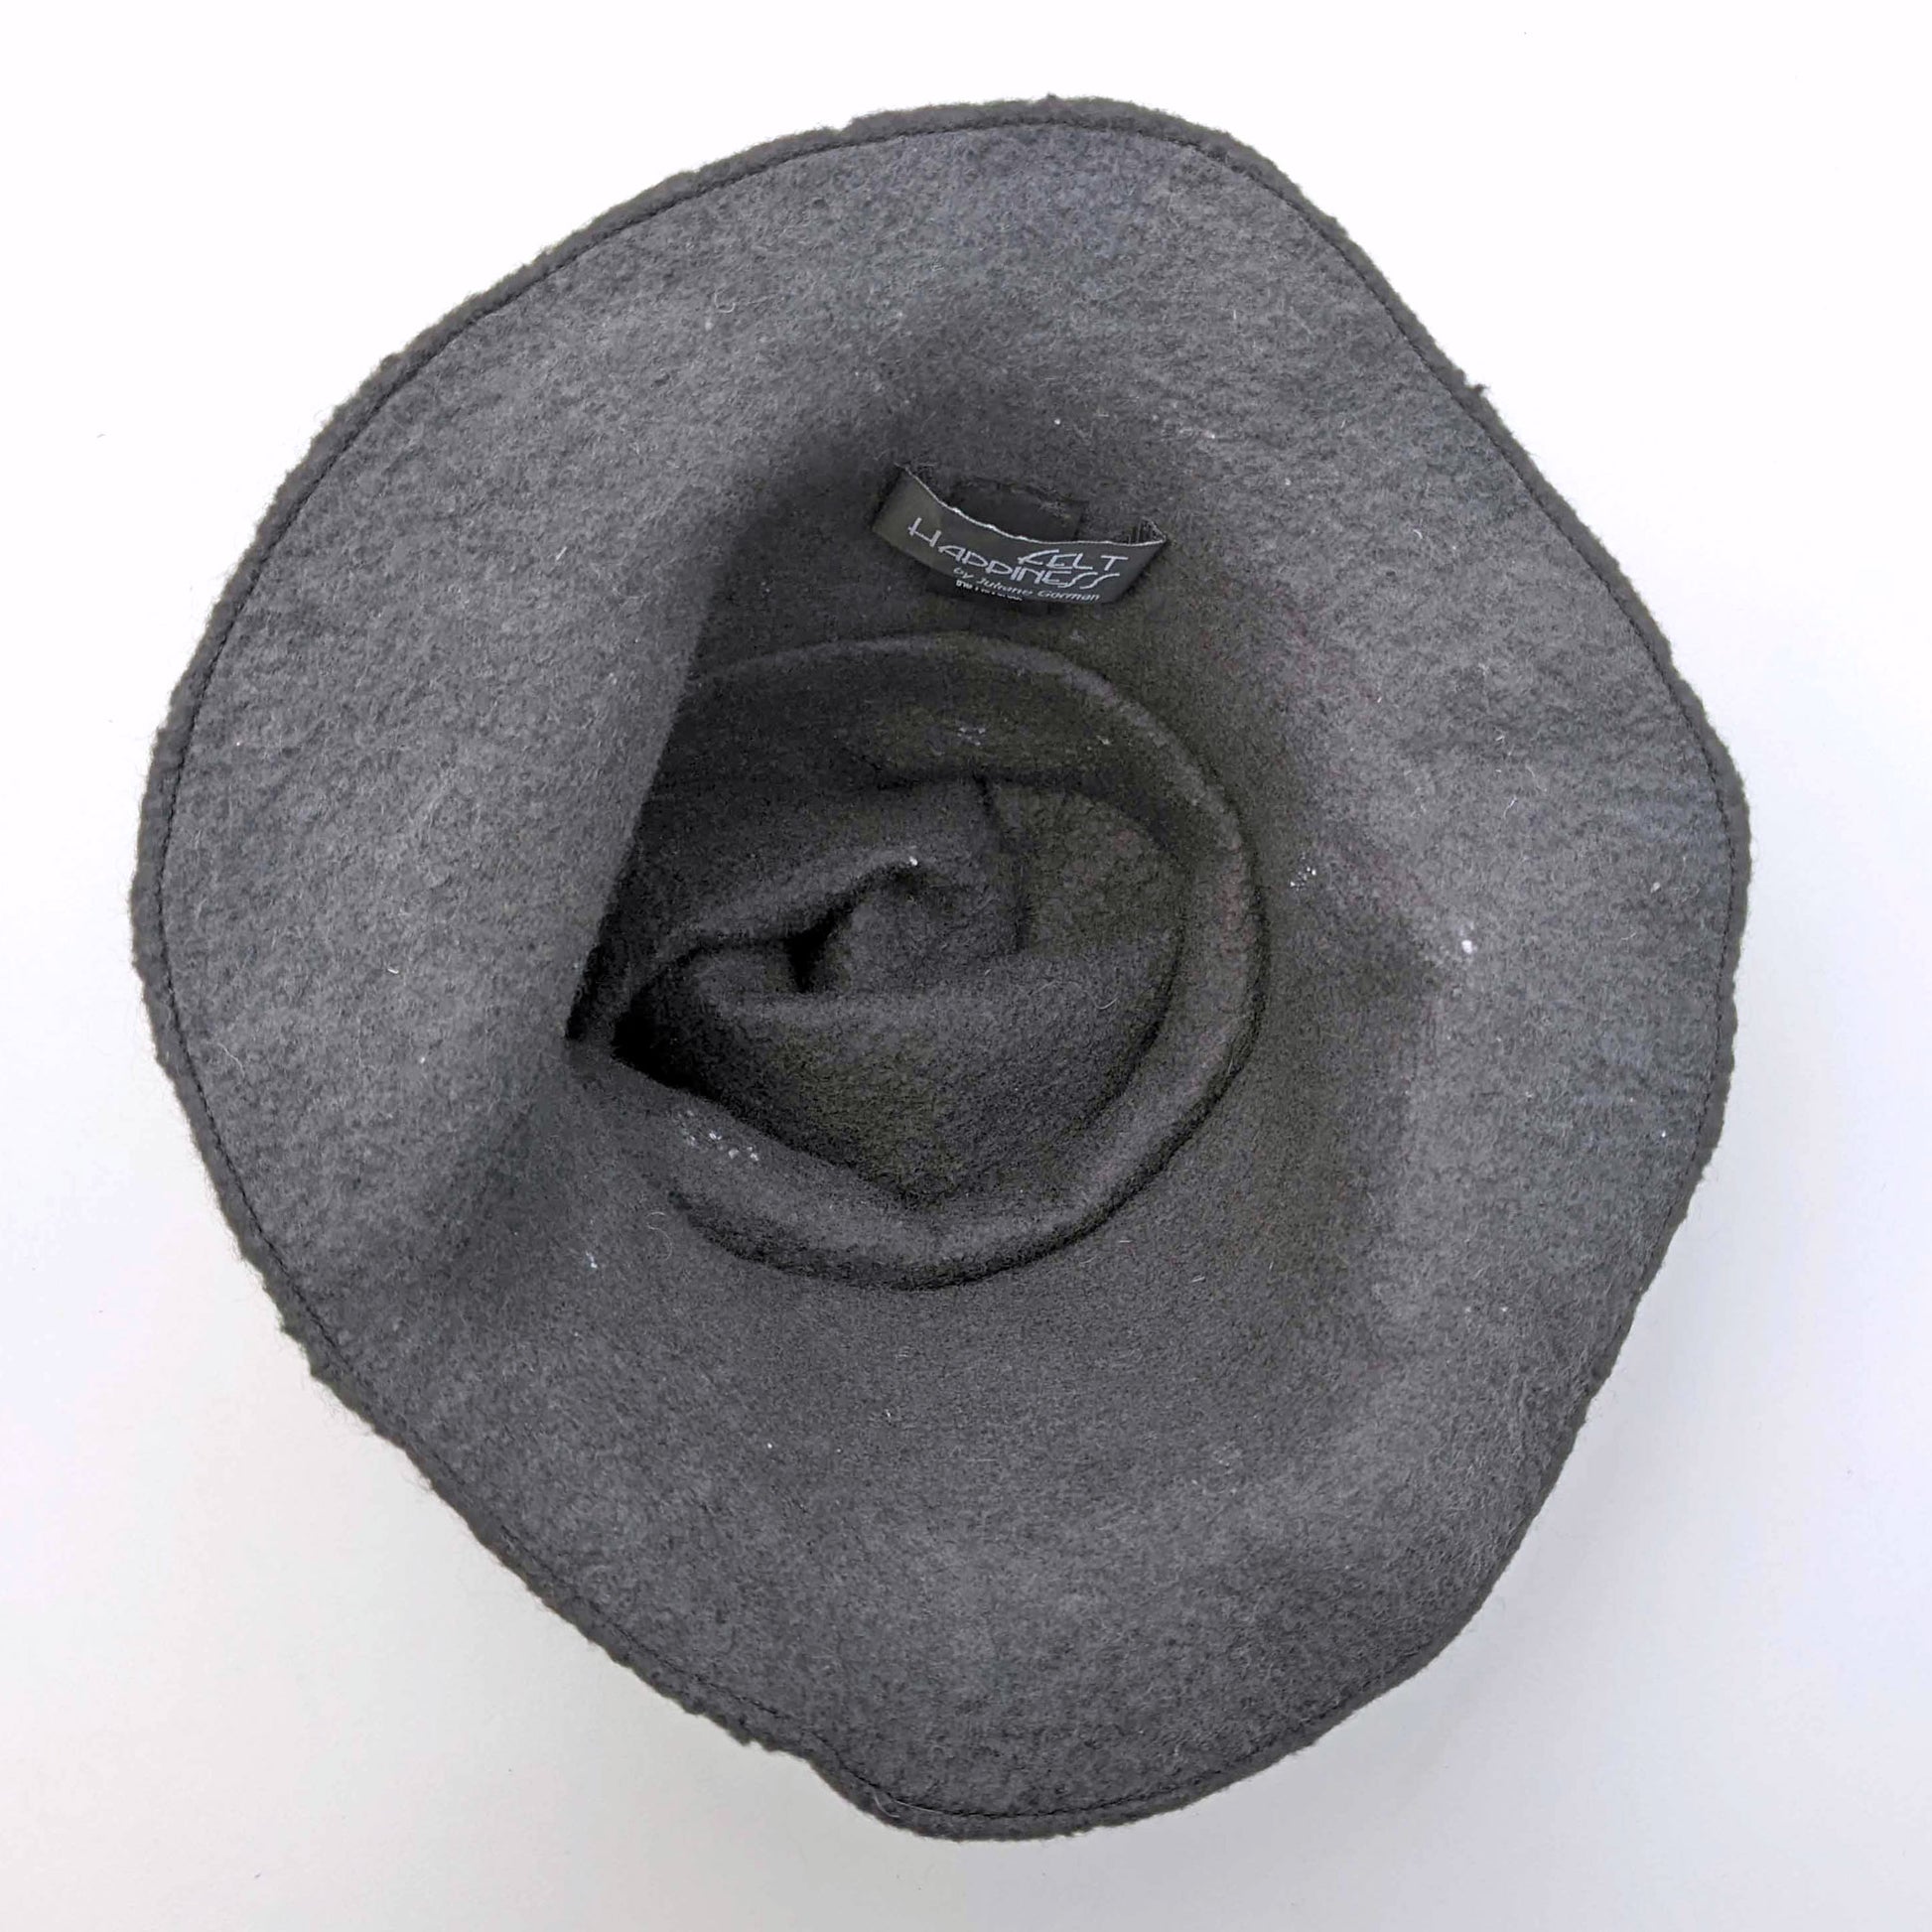 Nunofelted Black Hat with Brim and Organic Shaped Tip - insideview